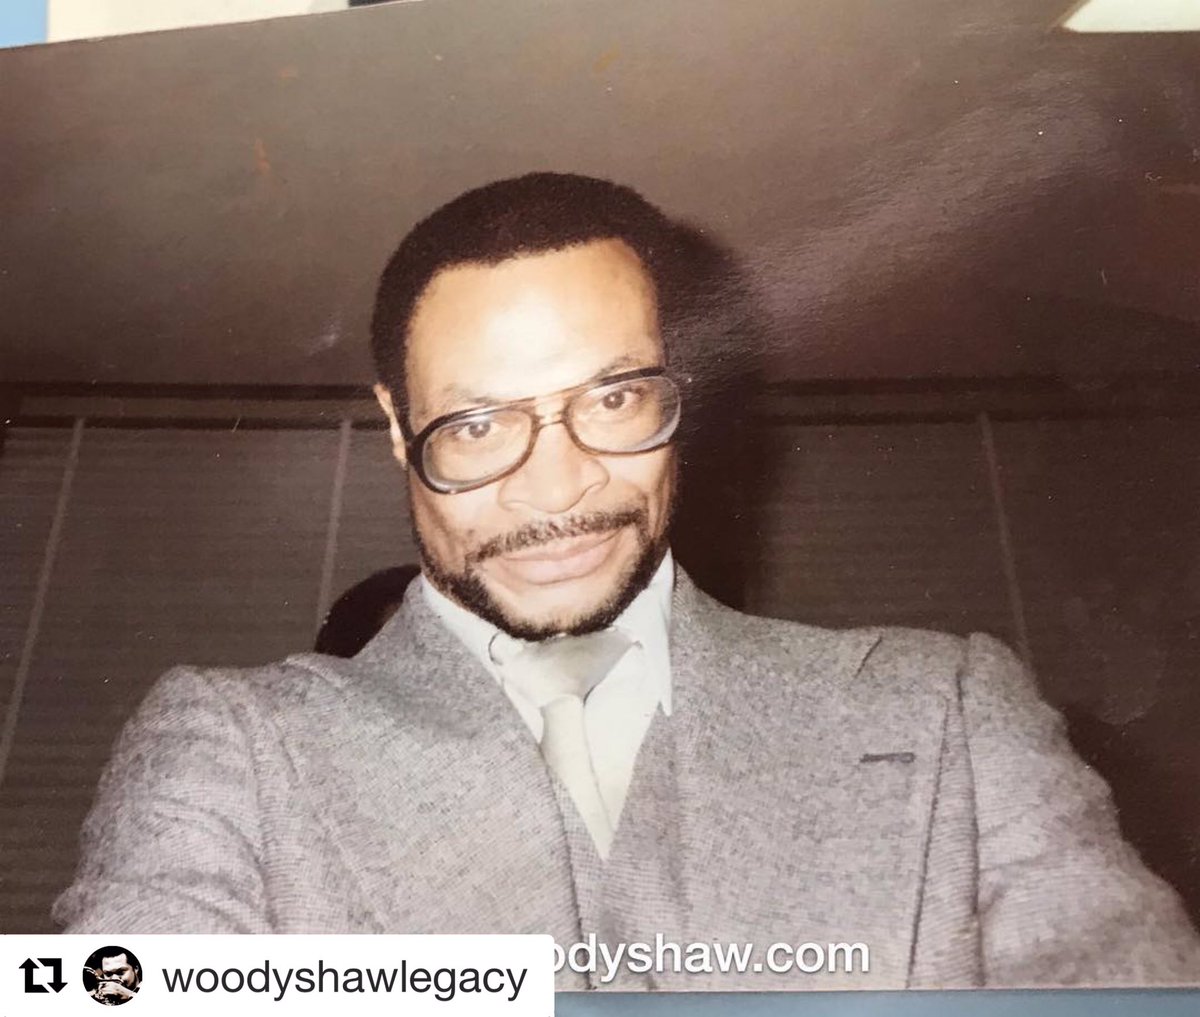 Ahead of his time in more ways than one - Woody Shaw seen here taking a “selfie” in 1981-82, long before the internet. Jazz man, blues man, black man, #Trumpet #Music #Jazz #AfricanAmericanMusic (Image (c) woodyshaw.com.).